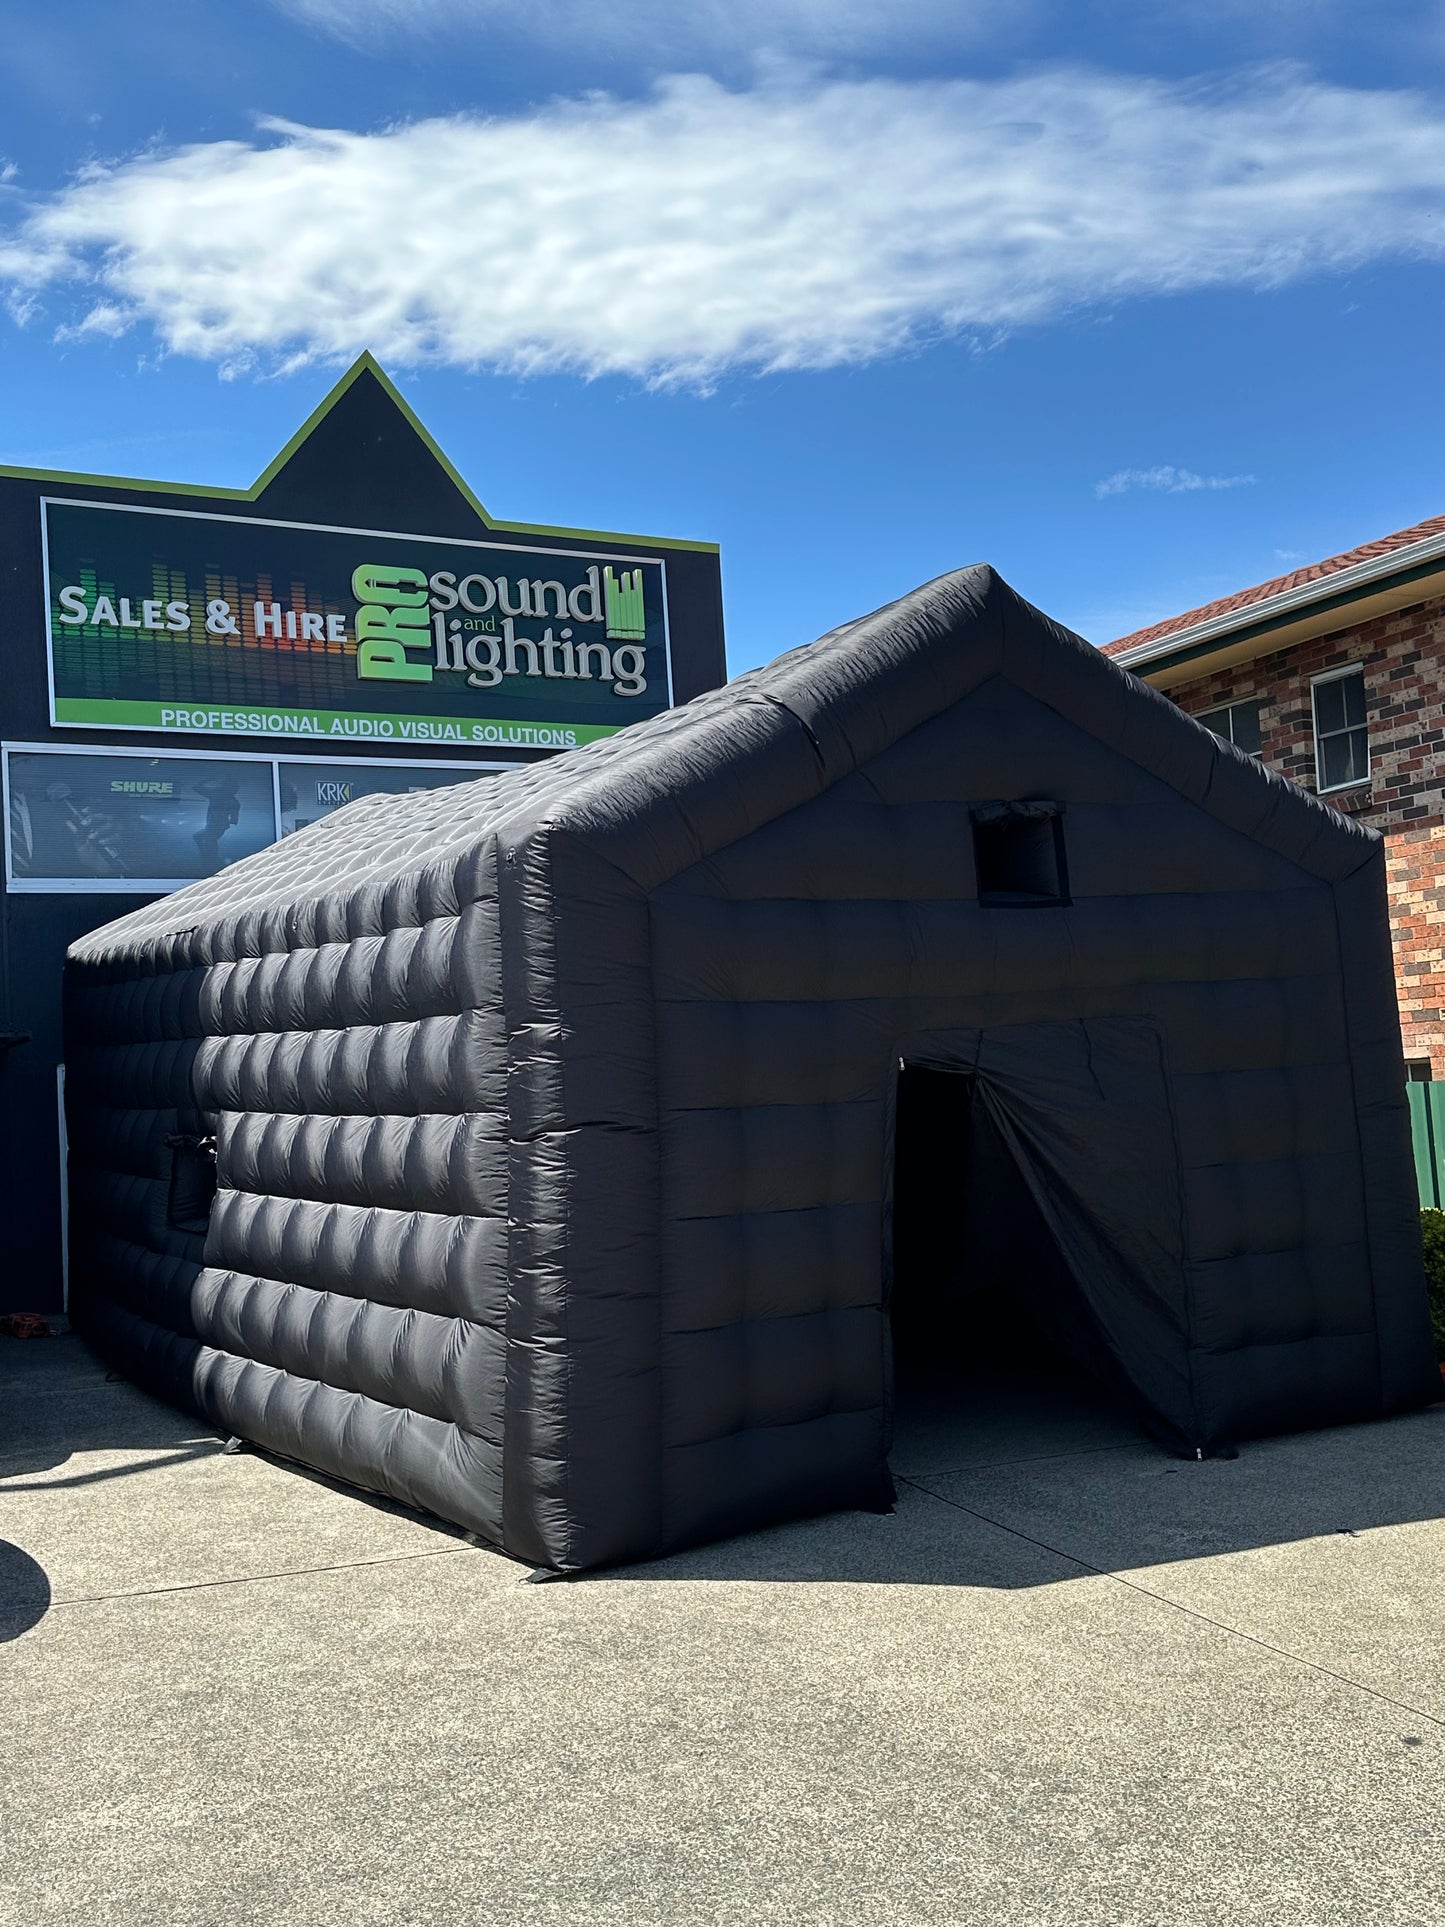 Hire - Inflatable Nightclub Party House